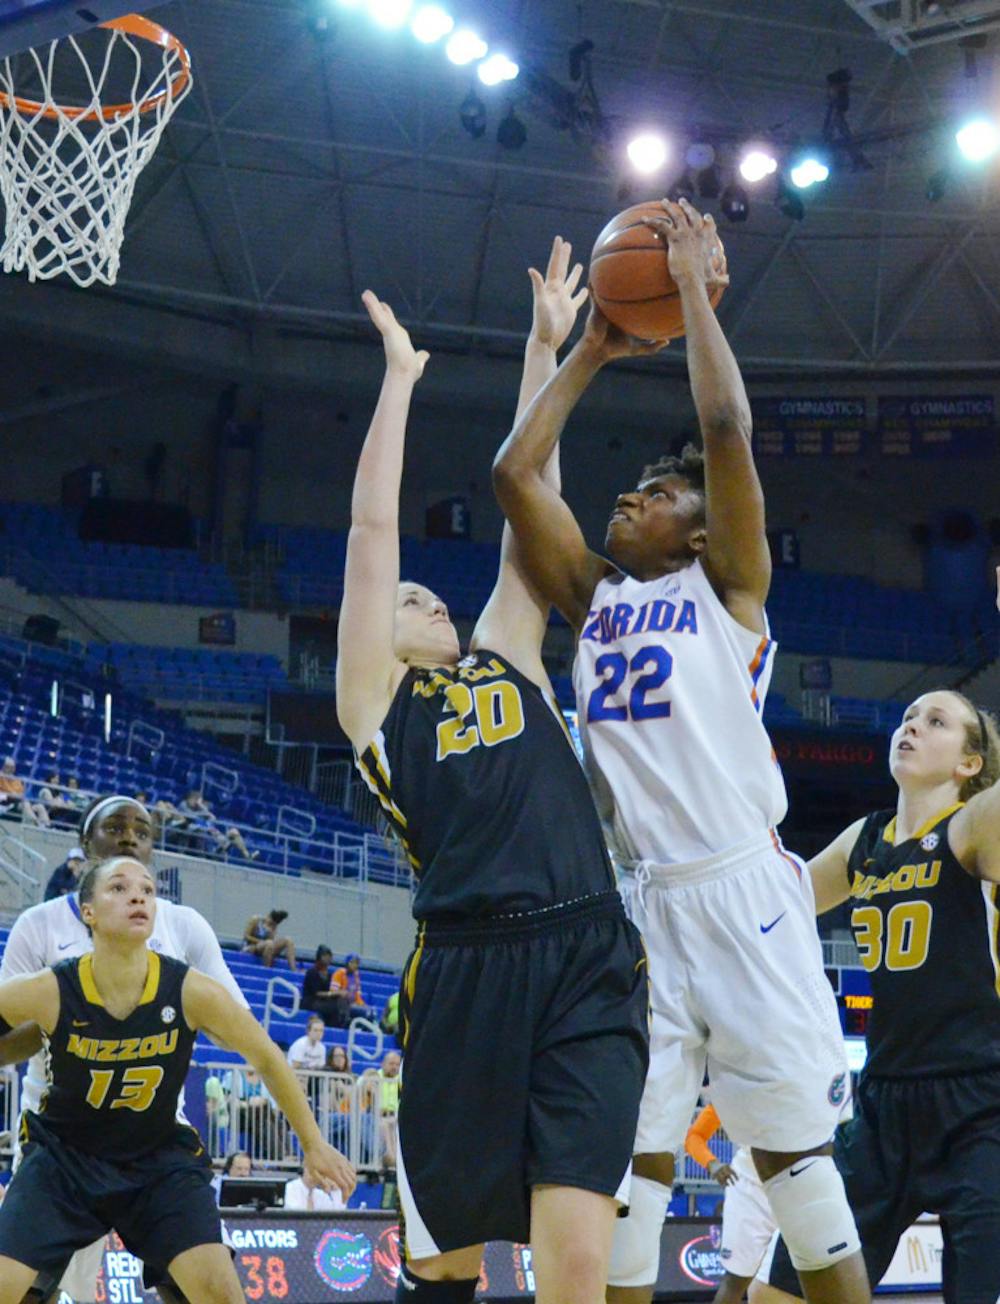 <p>Kayla Lewis (22) attempts a shot during Florida’s loss to Missouri on Feb. 20 in the O’Connell Center.</p>